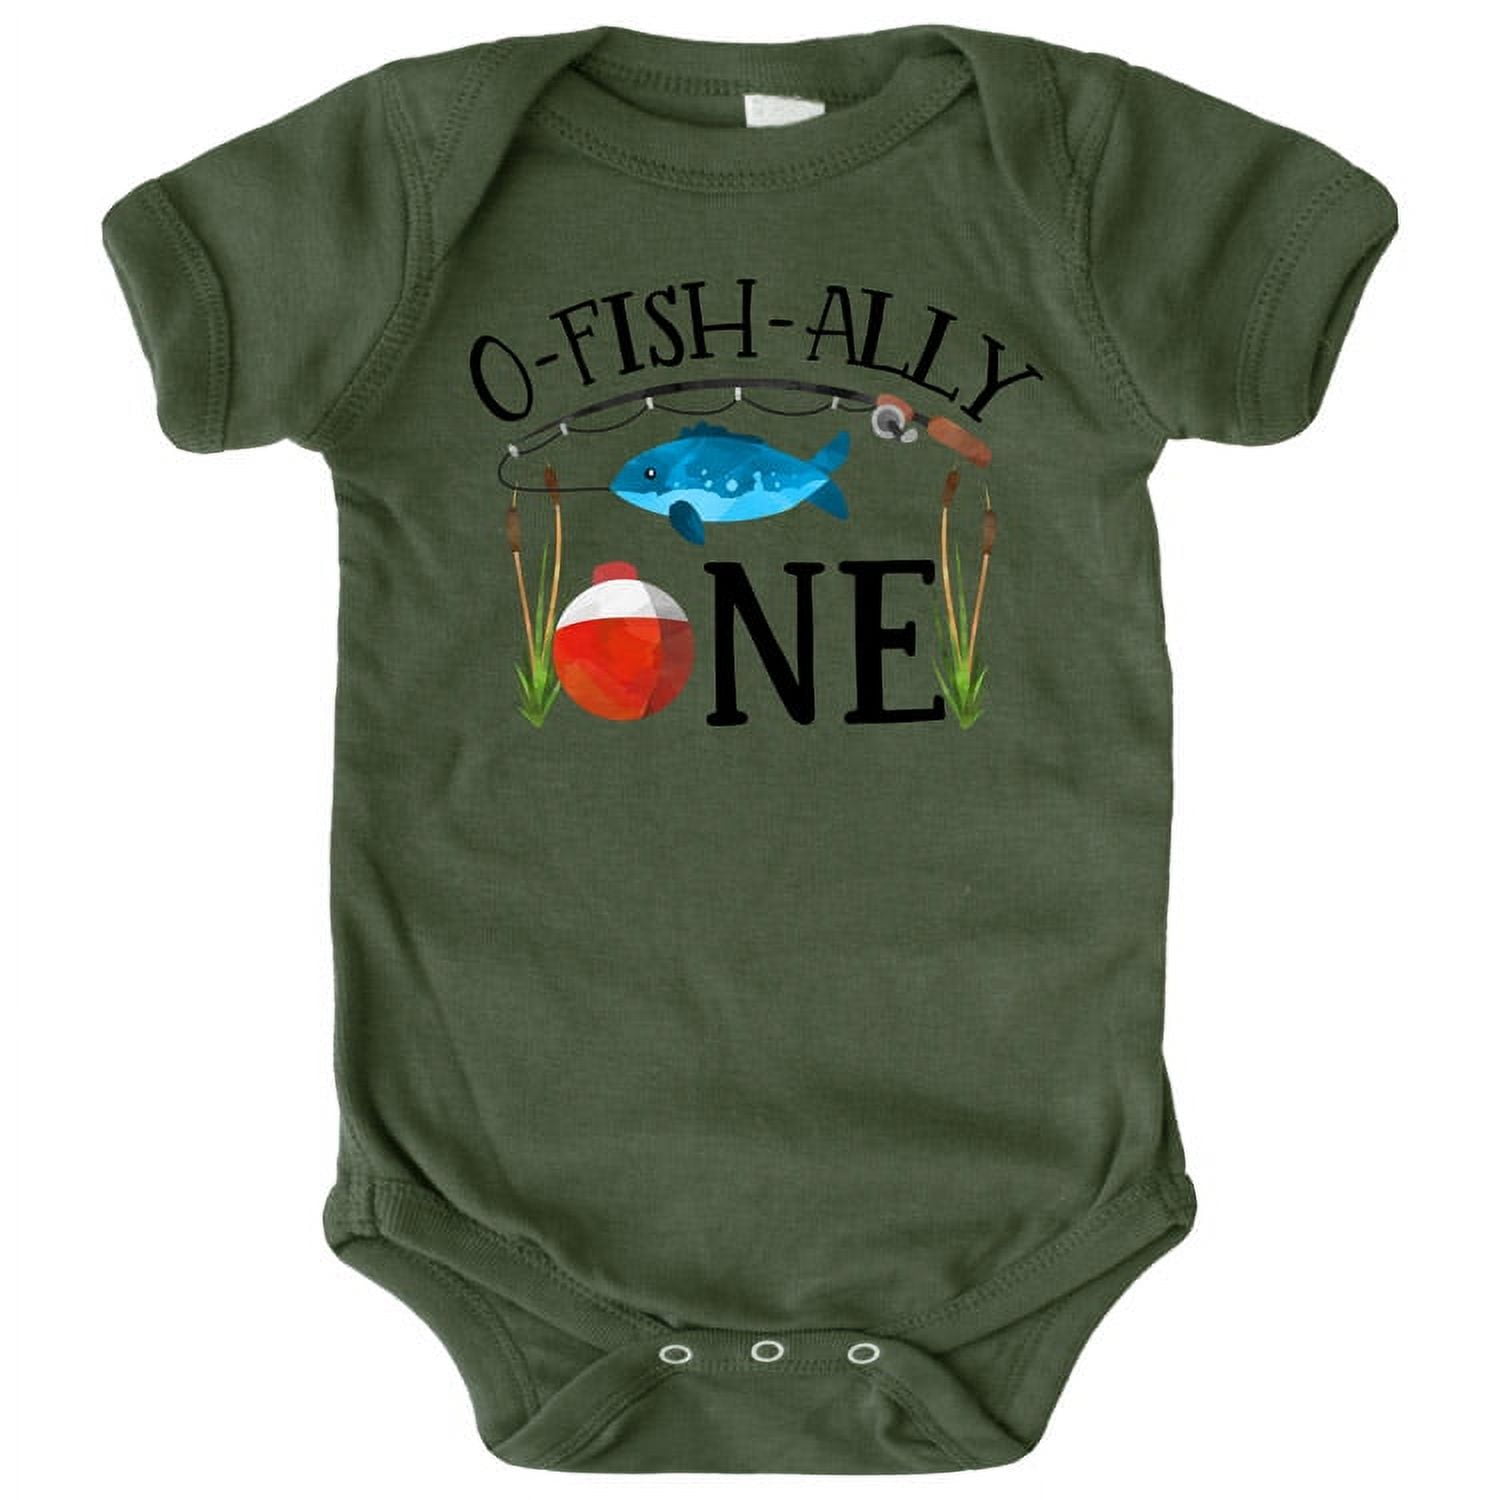 O-Fish-Ally- ONE Boys 1st Birthday Bodysuit for Baby Boys Fishing First  Birthday Outfit Military Green Bodysuit